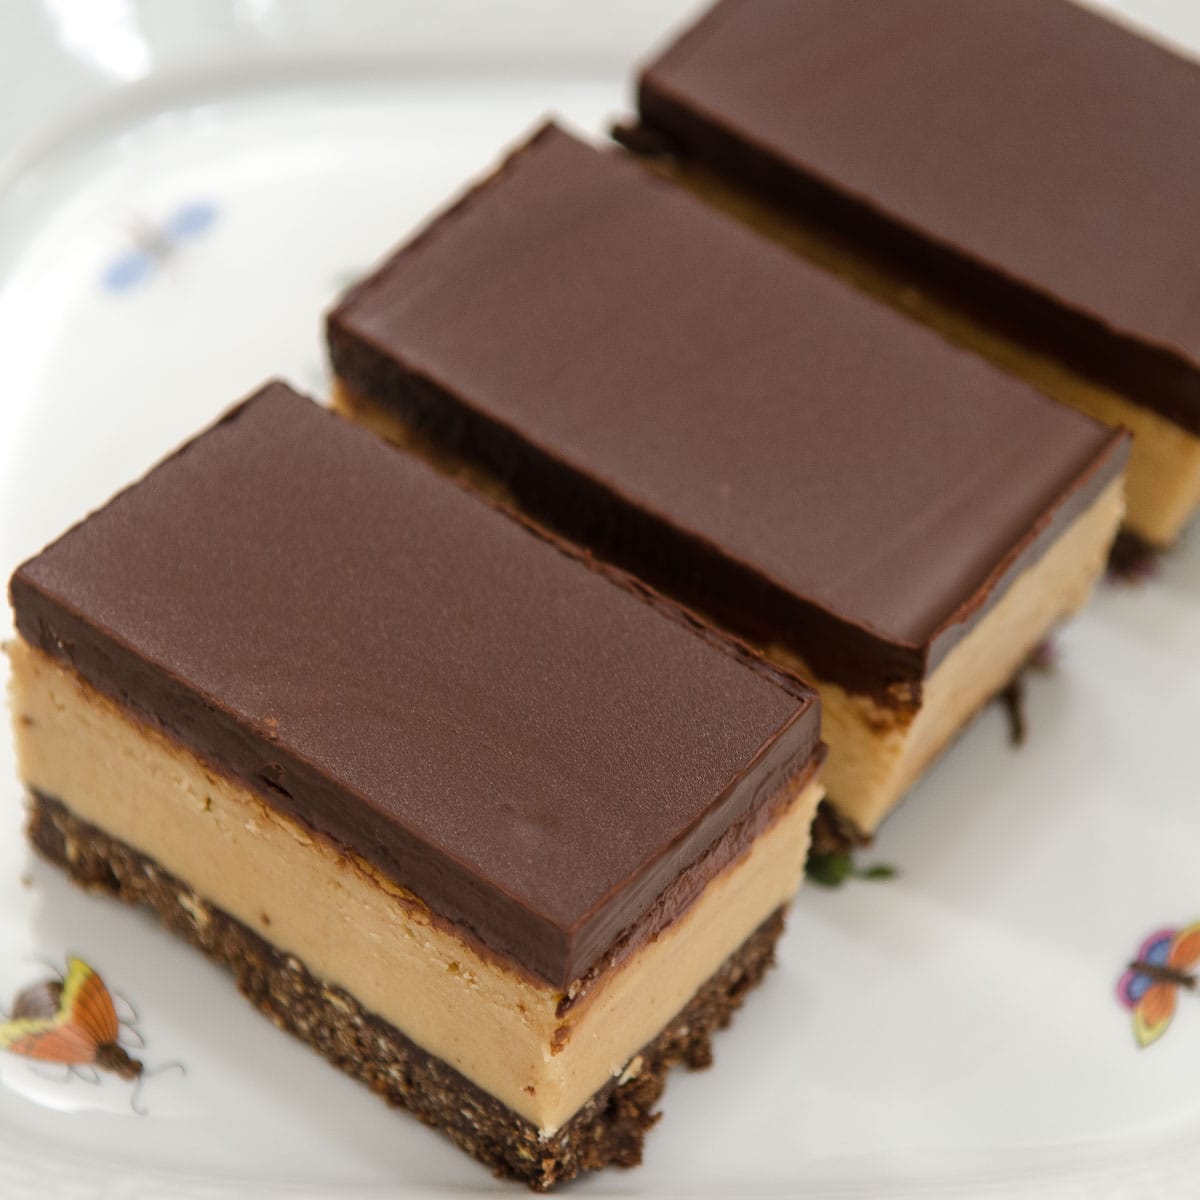 No Bake Peanut Butter Bars on a white plate with bees on it.